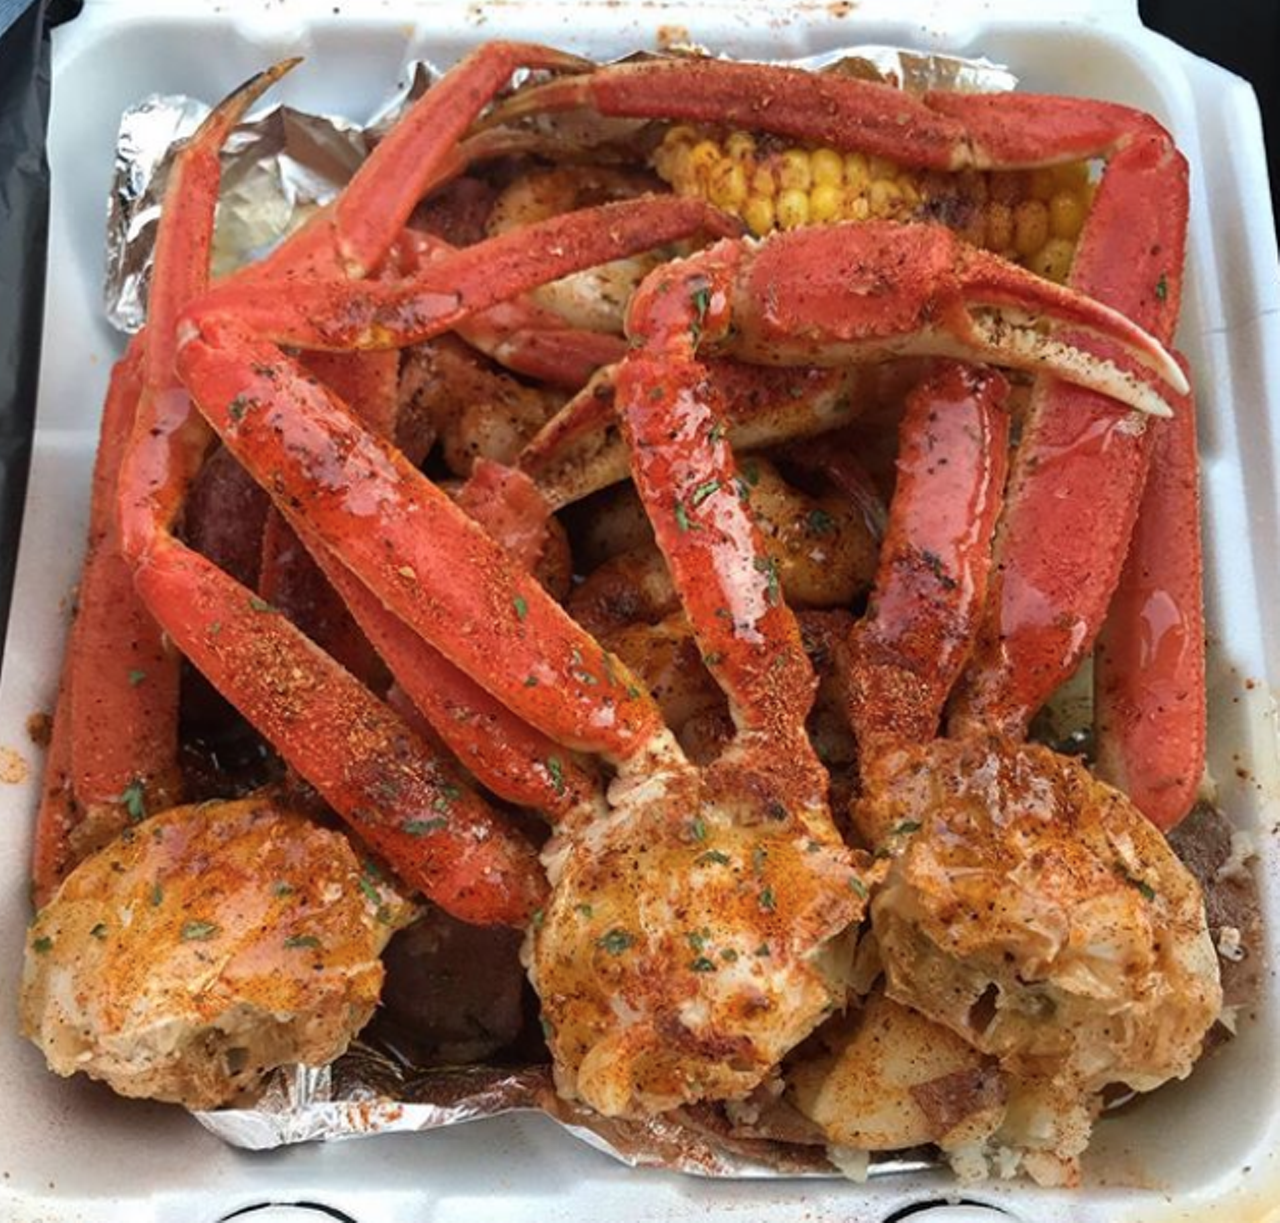 Krab Kingz
2301 San Pedro Ave, (254) 338-6116, facebook.com/KrabKingzSanAntonio
A venture that originally started in Houston, this San Antonio truck is heaven-sent with perfectly seasoned crab legs and other scrumptious seafood fare. And yes, it’s all from a food truck! Plates are packed and accompanied by sides like corn, egg, potatoes, sausage and shrimp.
Photo via Instagram / amryjade